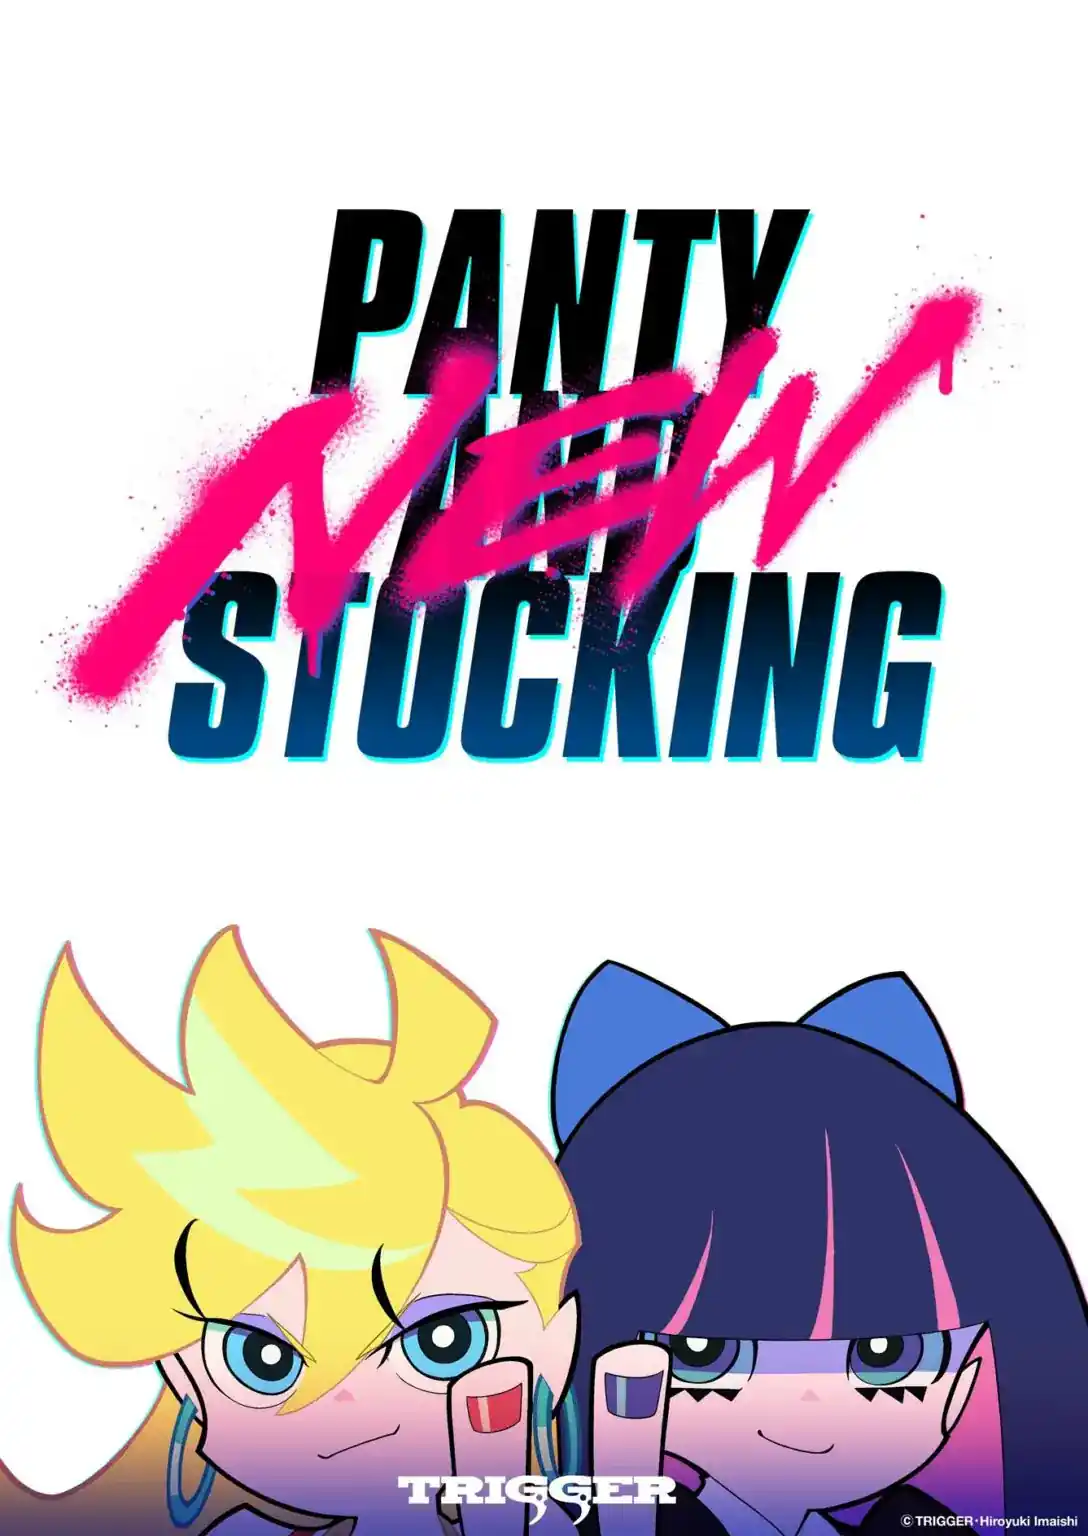 Trigger has the rights of Panty & Stocking